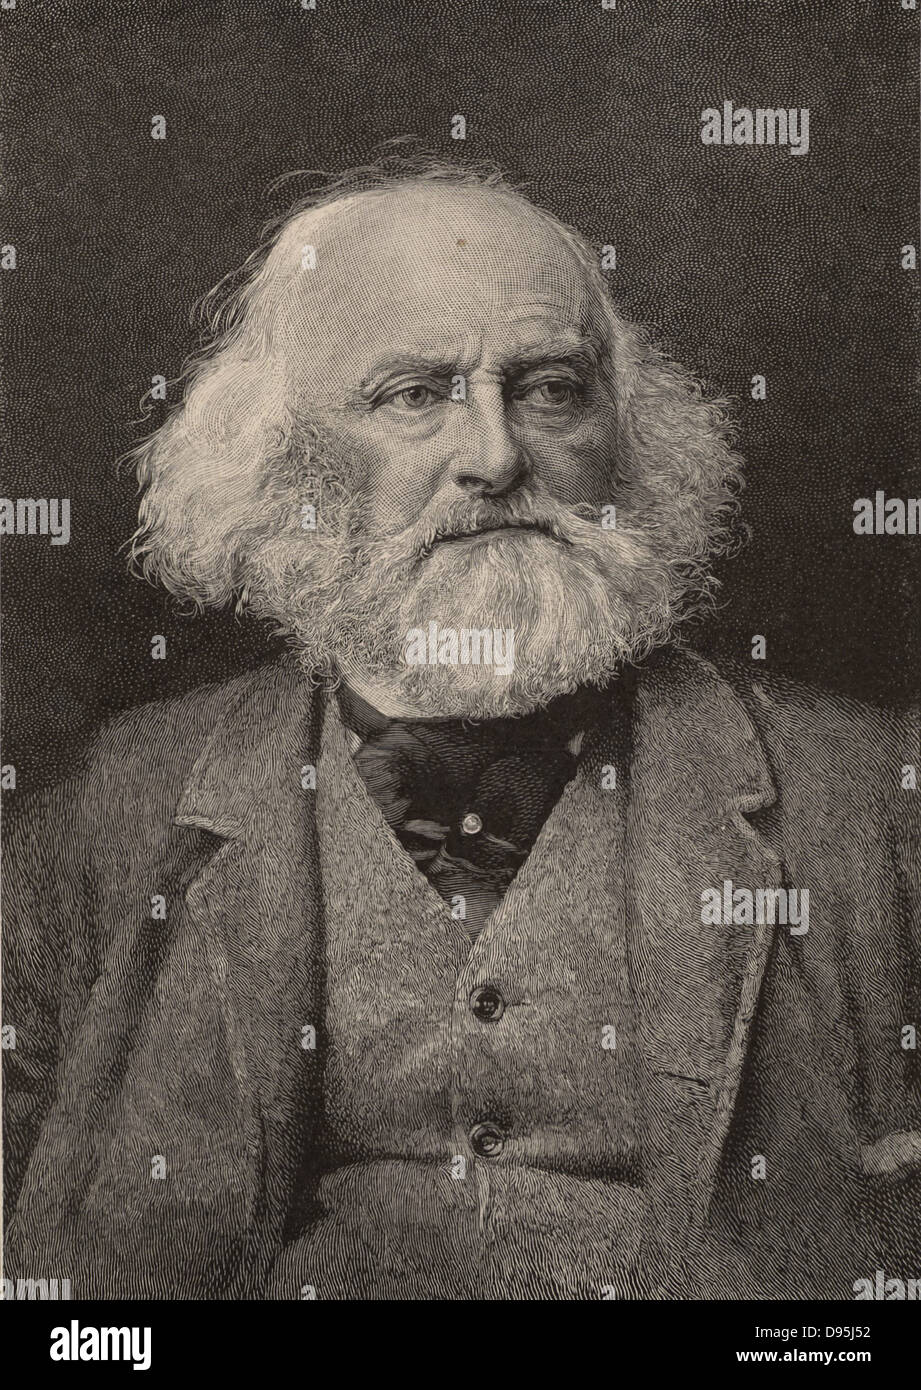 Lewis Morris Rutherford (1816-1892), American lawyer and astronomer. Pioneer in the field of spectrum analysis and astrophotography.  From 'The Popular Science Monthly' (New York, January 1893). Engraving. Stock Photo